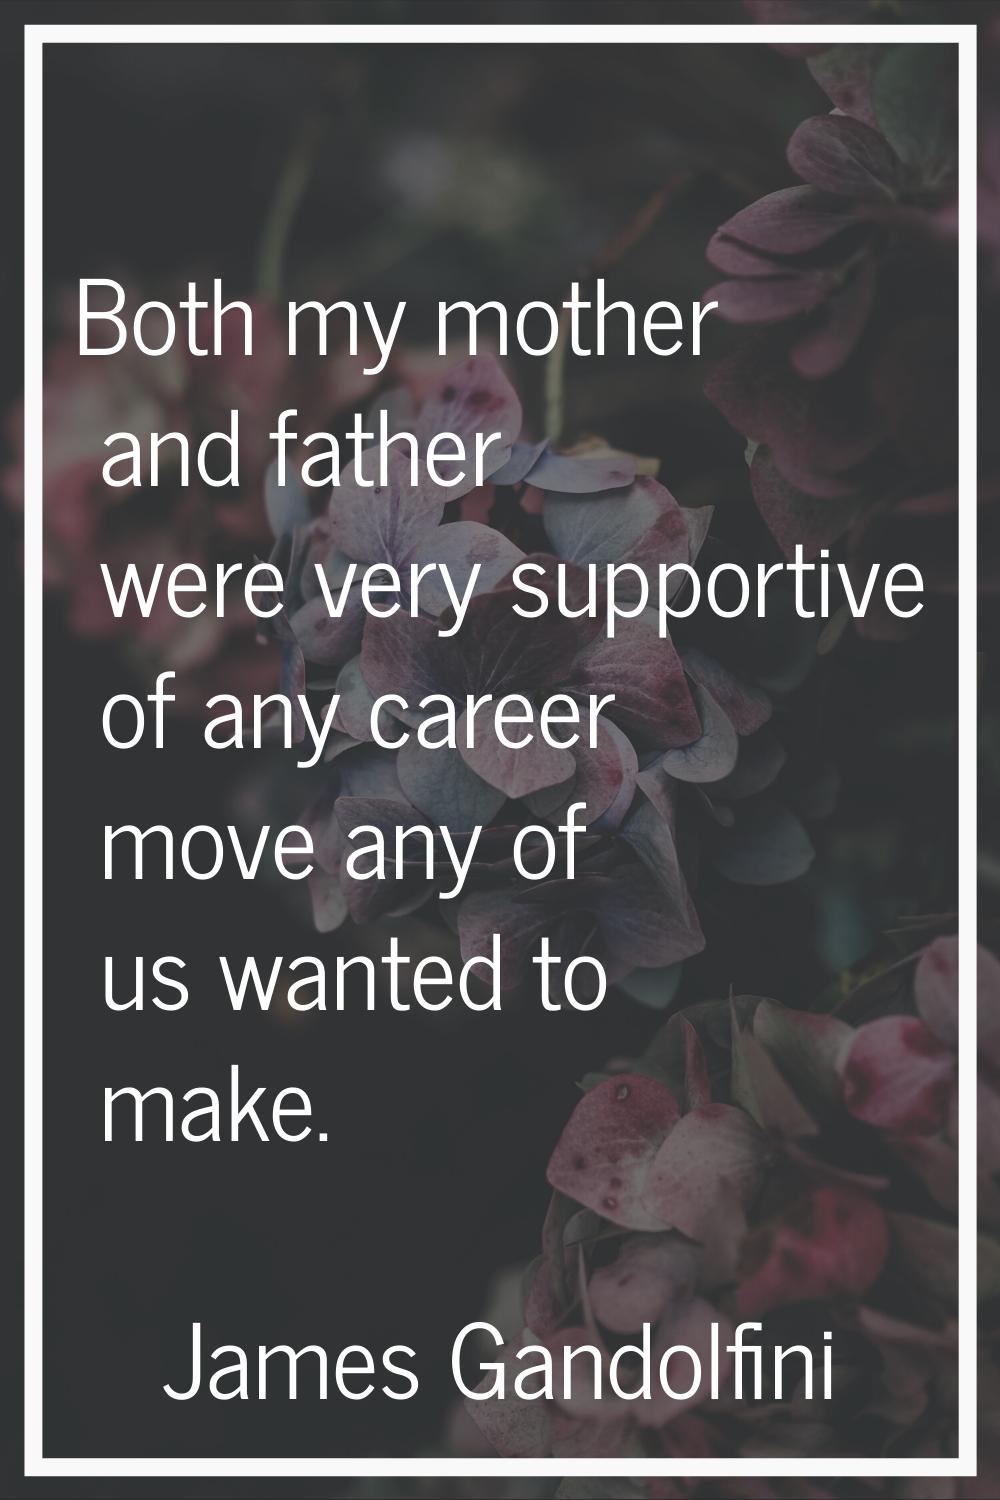 Both my mother and father were very supportive of any career move any of us wanted to make.